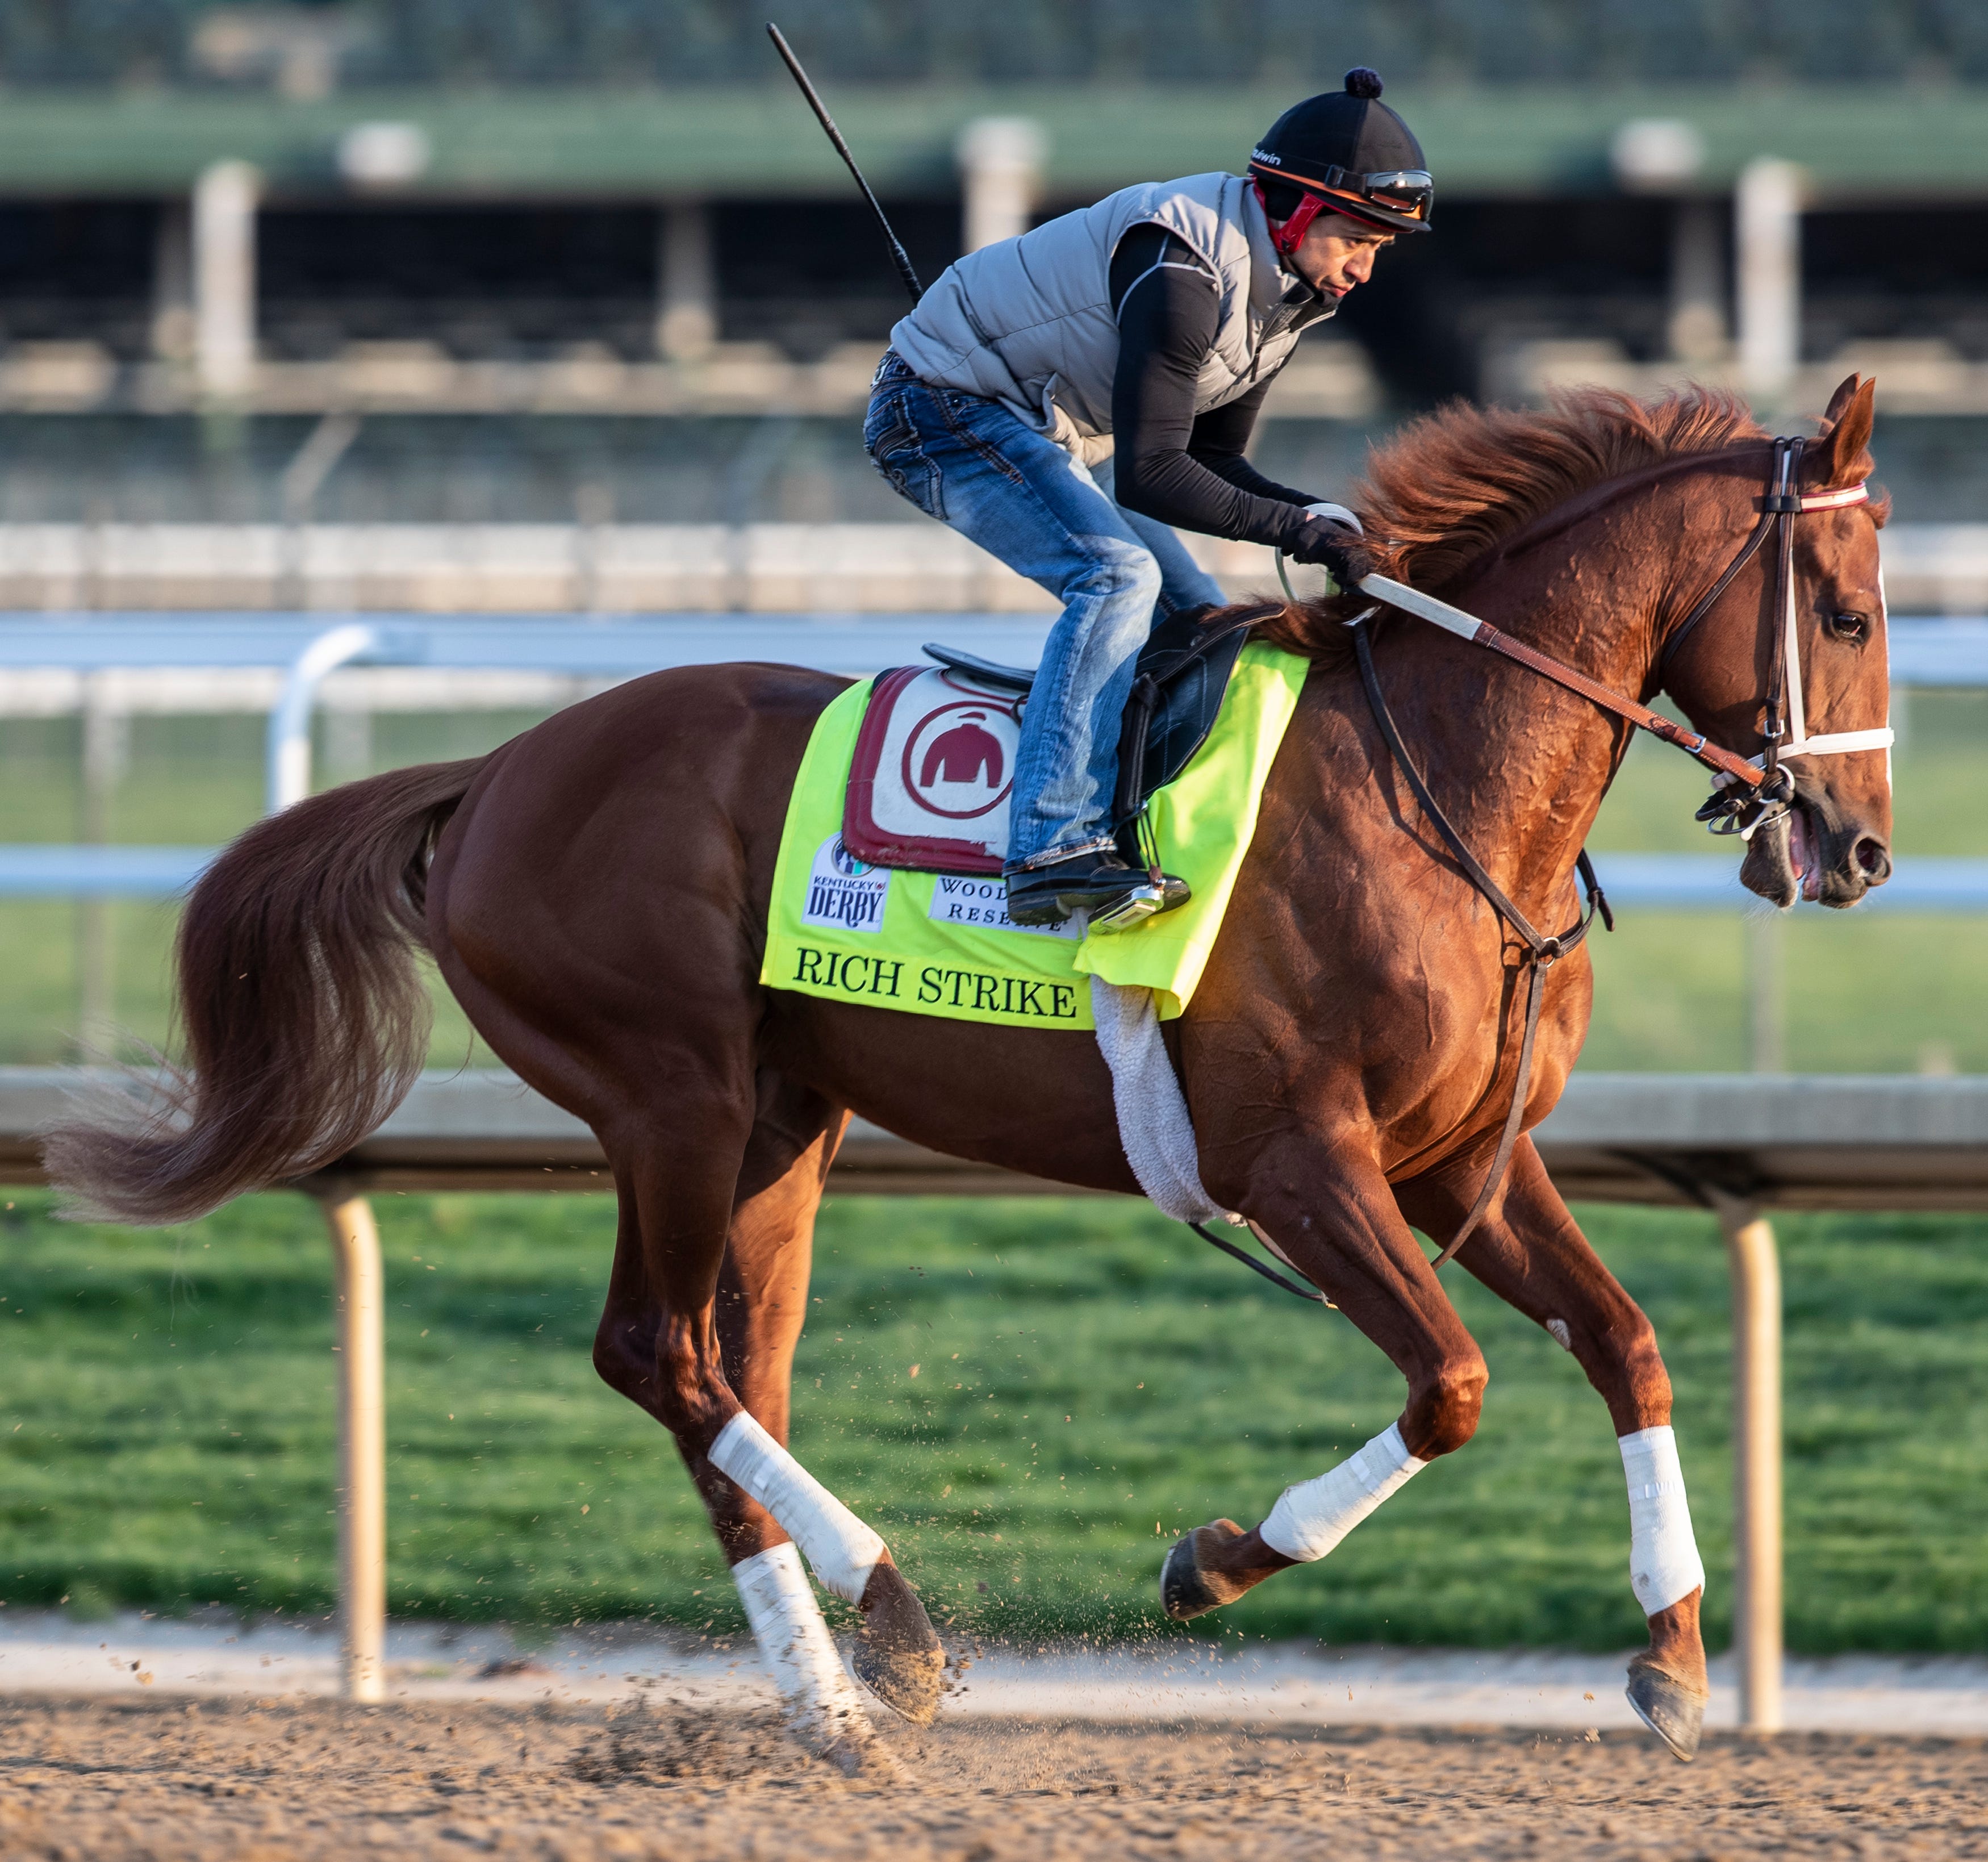 Kentucky Derby hopeful Rich Strike gallops in the morning at Churchill Downs.